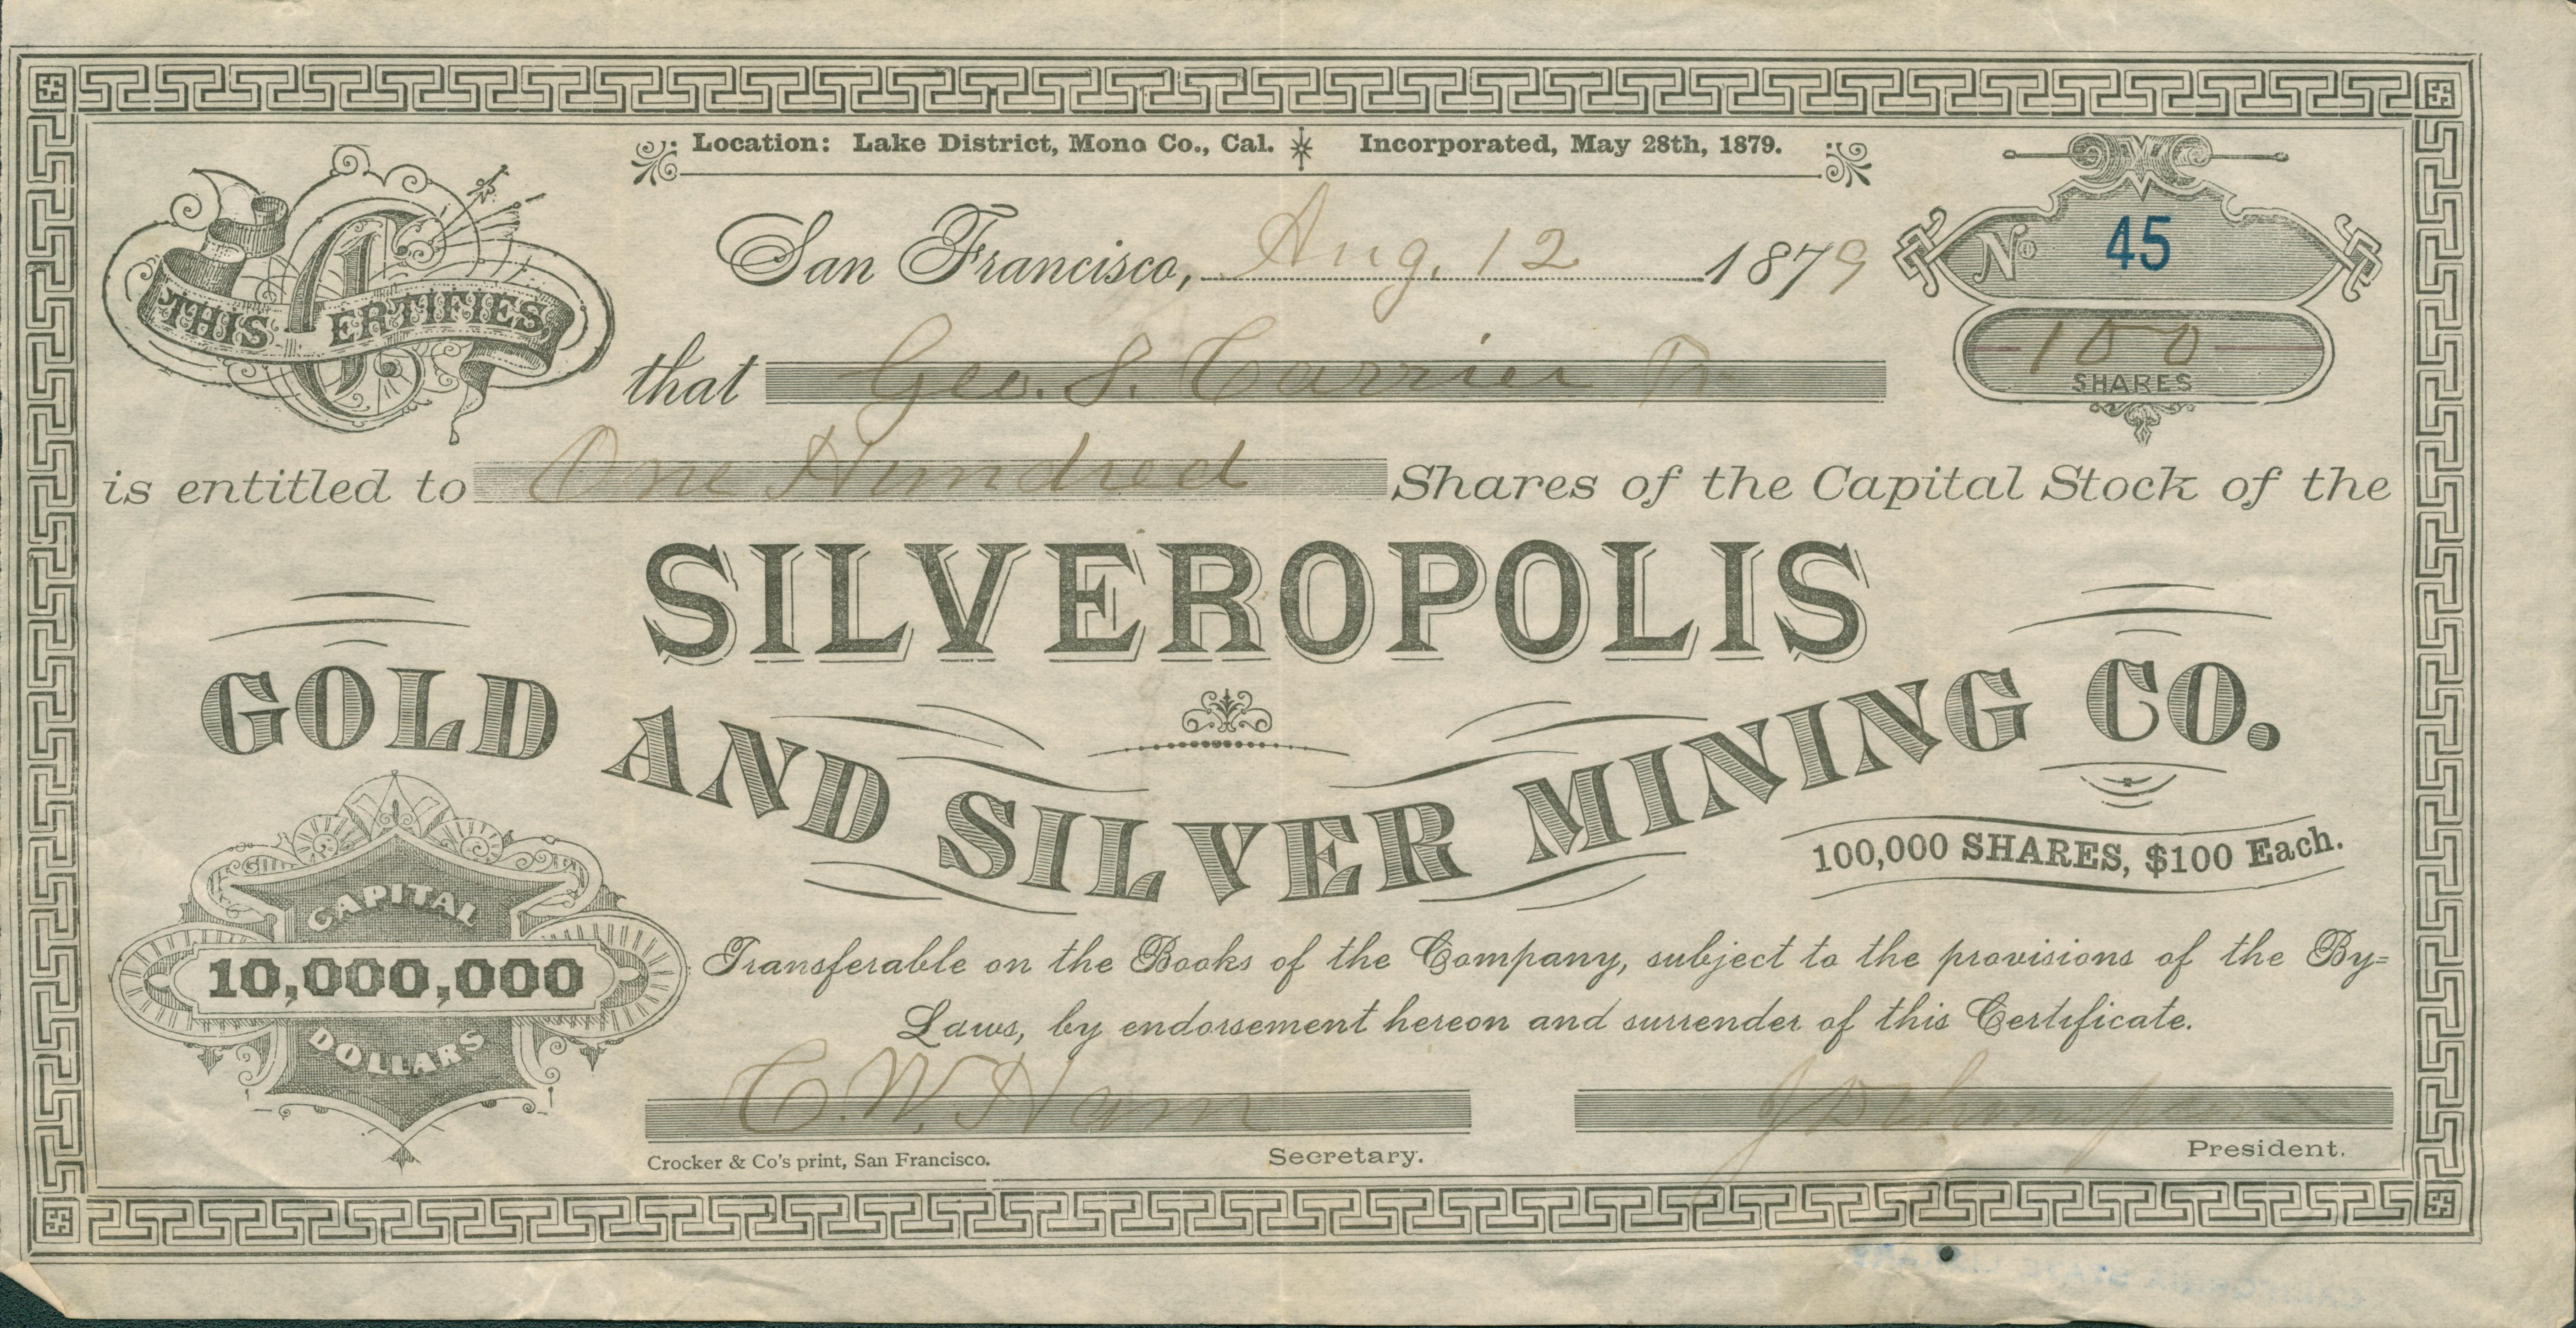 Certificate, No. 45, for 100 Shares, signed by George S. Carrier, Jr.  Crocker & Co's print, San Francisco.